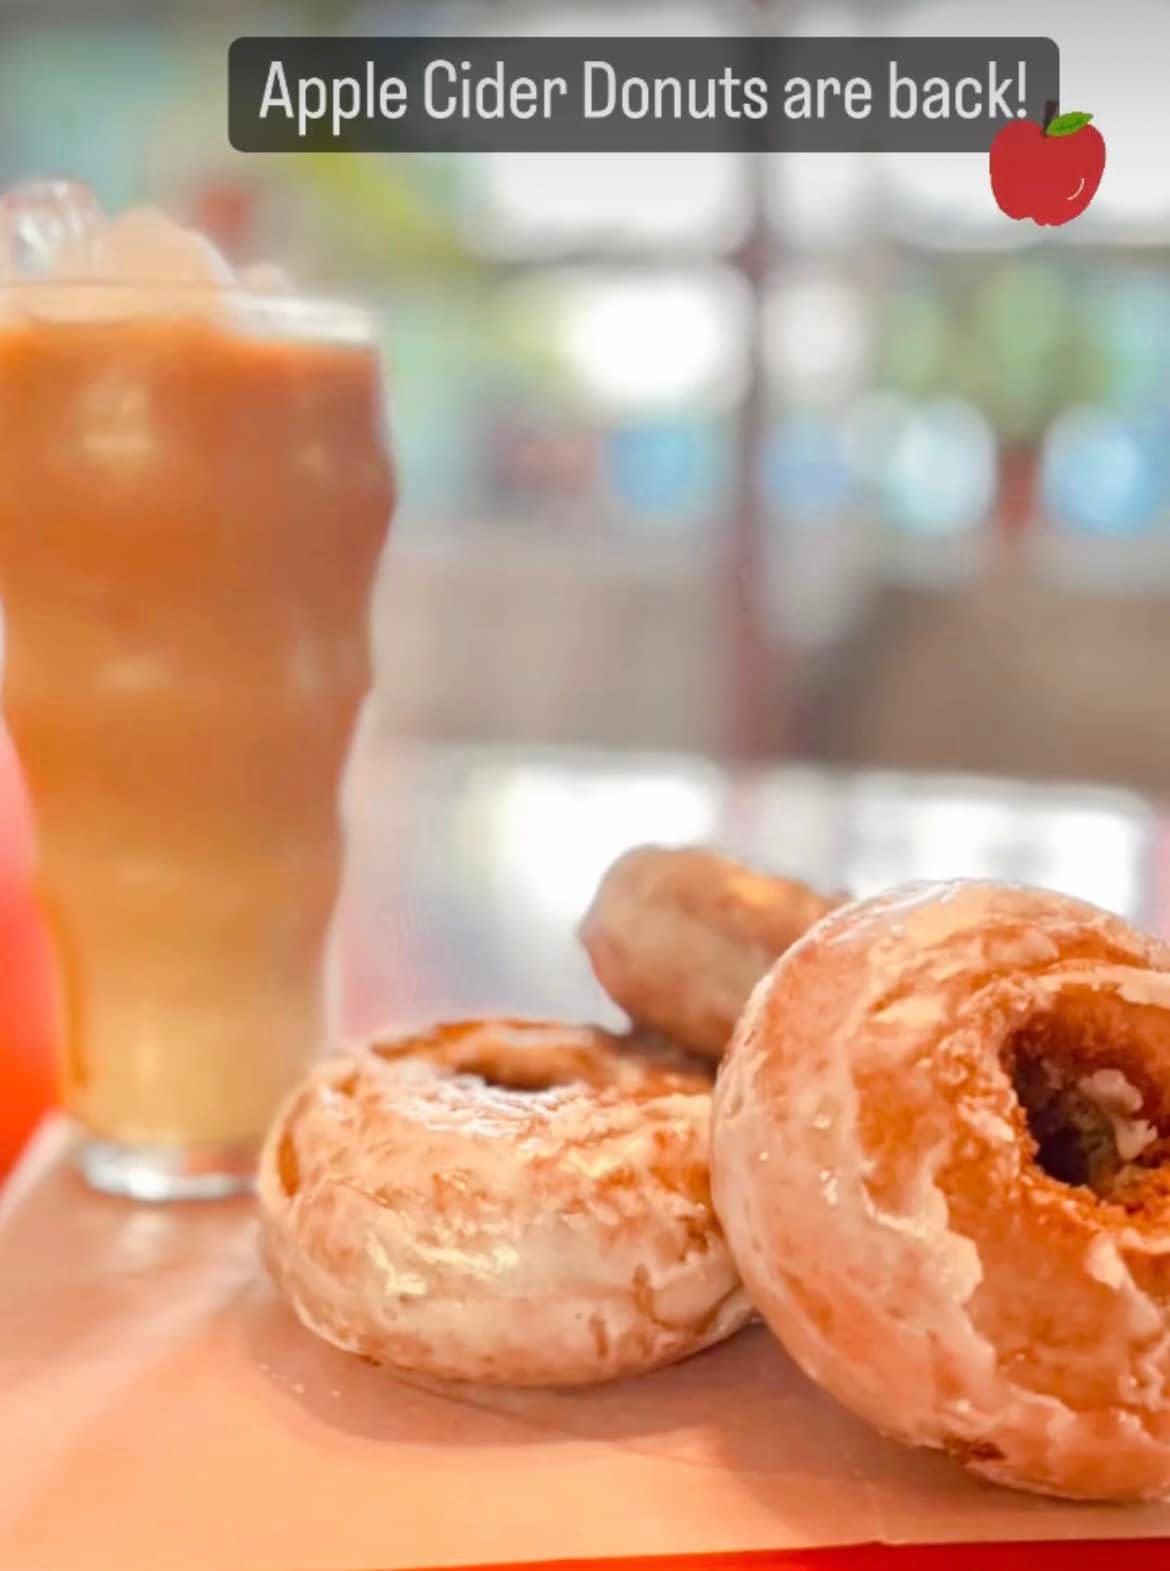 Get your fall vibes with the Apple Cider Donut at Town Donut.